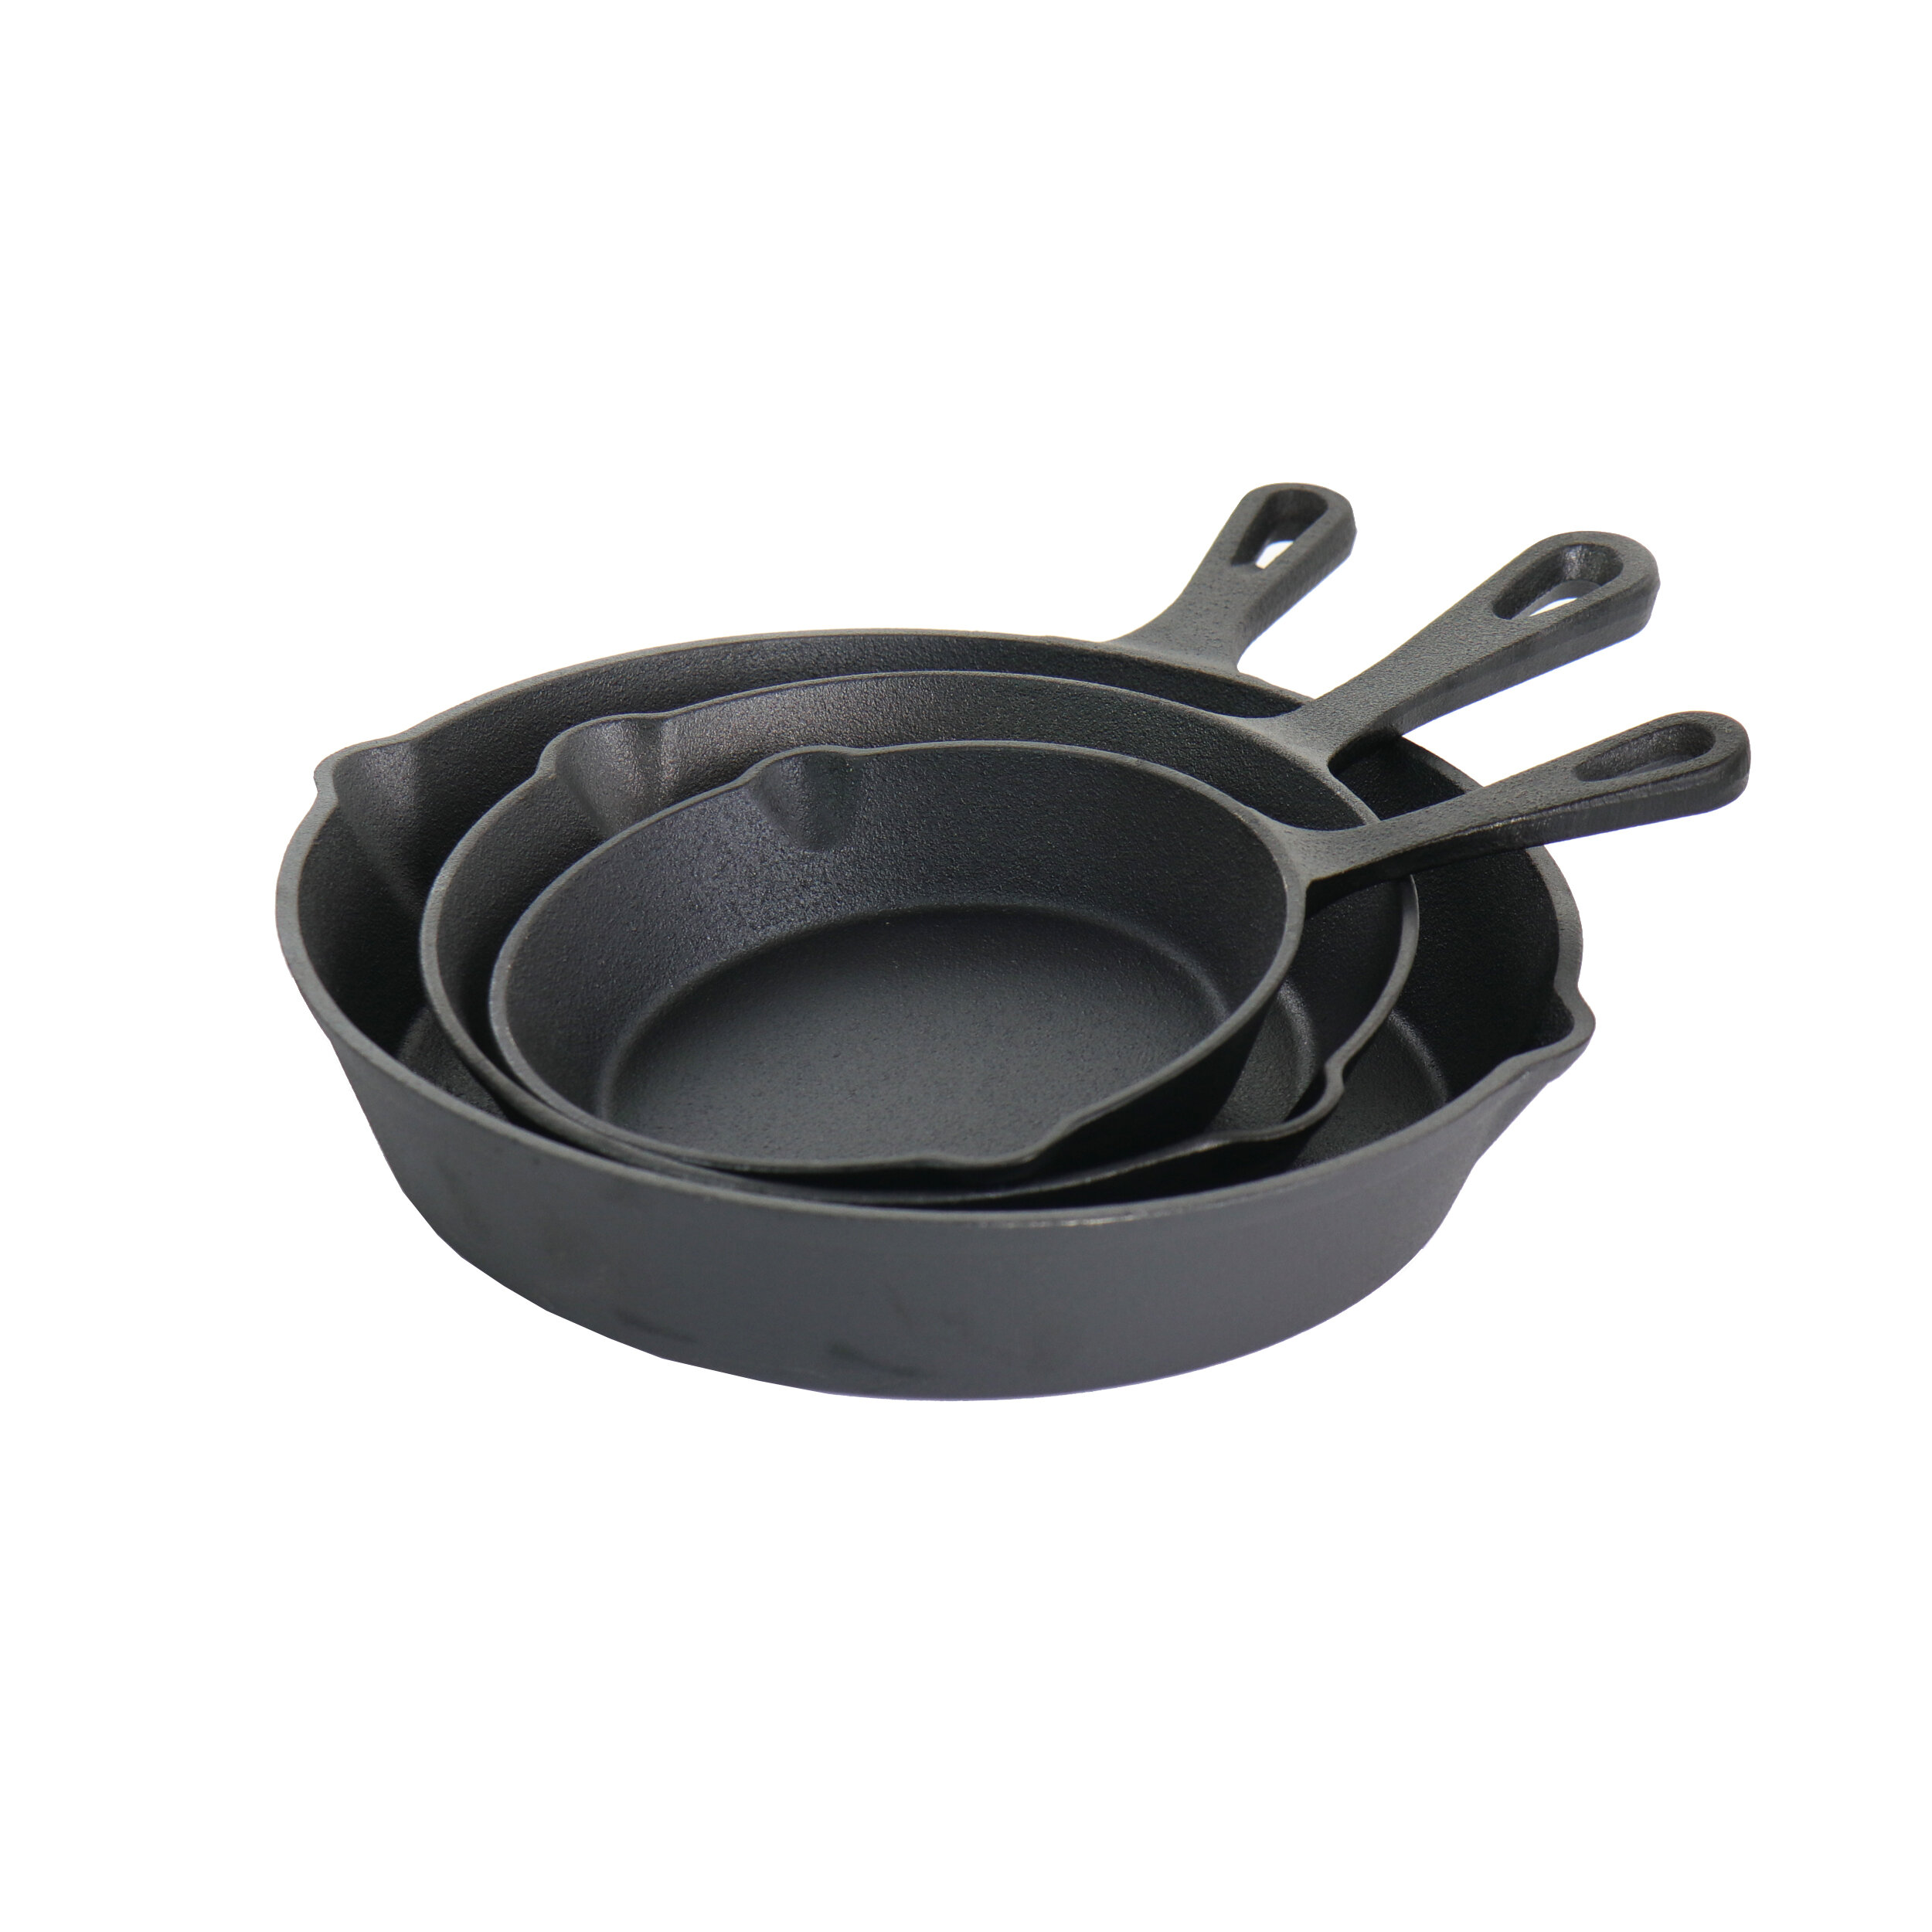 Pre-Seasoned Cast Iron Skillet 3-Piece chef Set (6-Inch 8-Inch and 10-Inch)